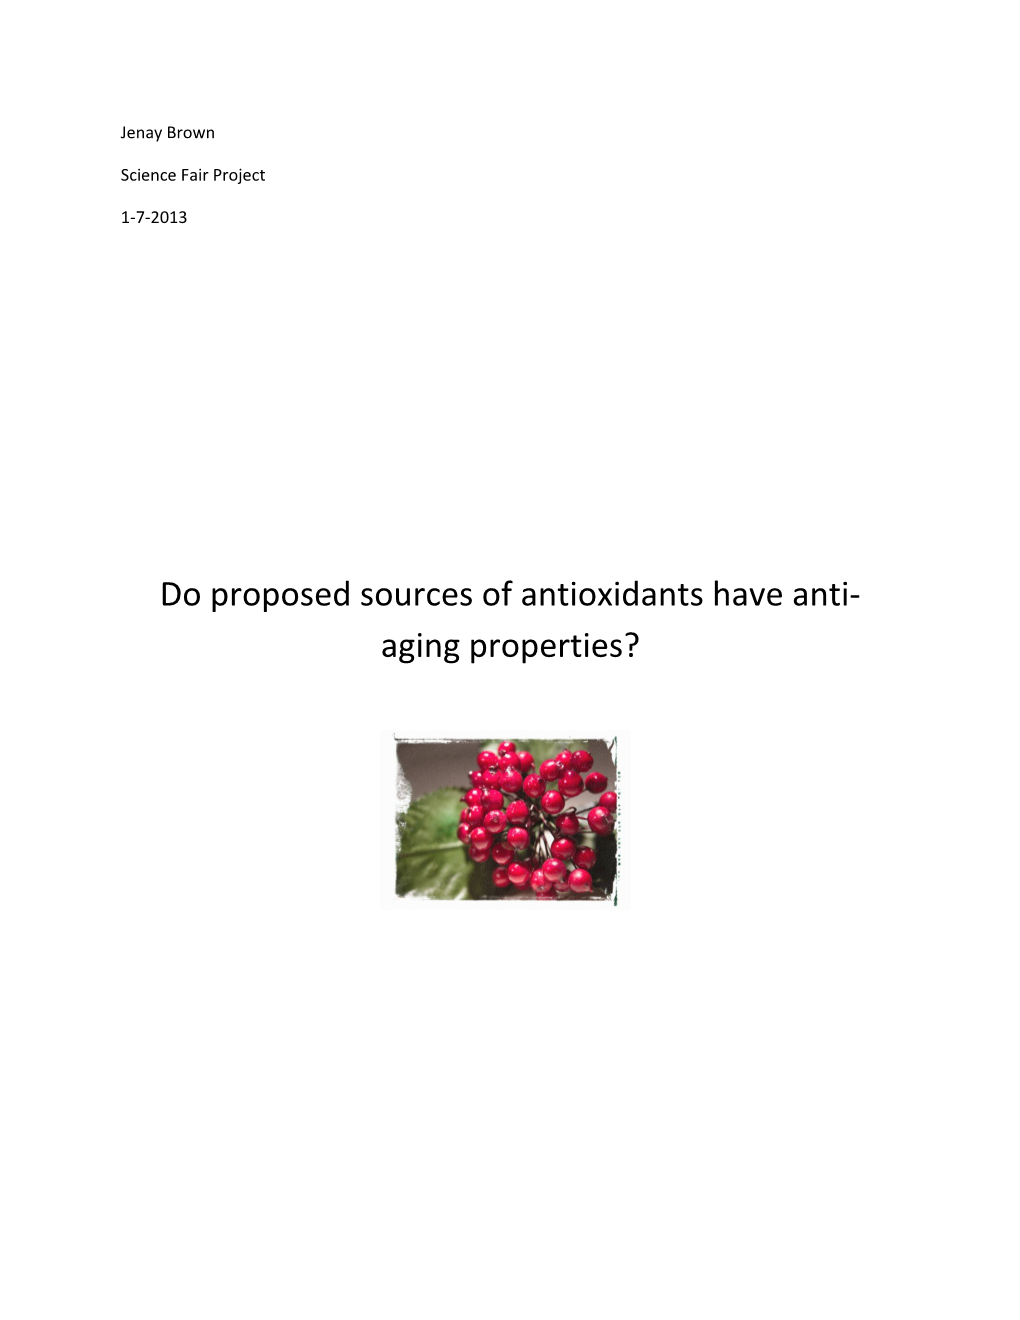 Do Proposed Sources of Antioxidants Have Anti-Aging Properties?